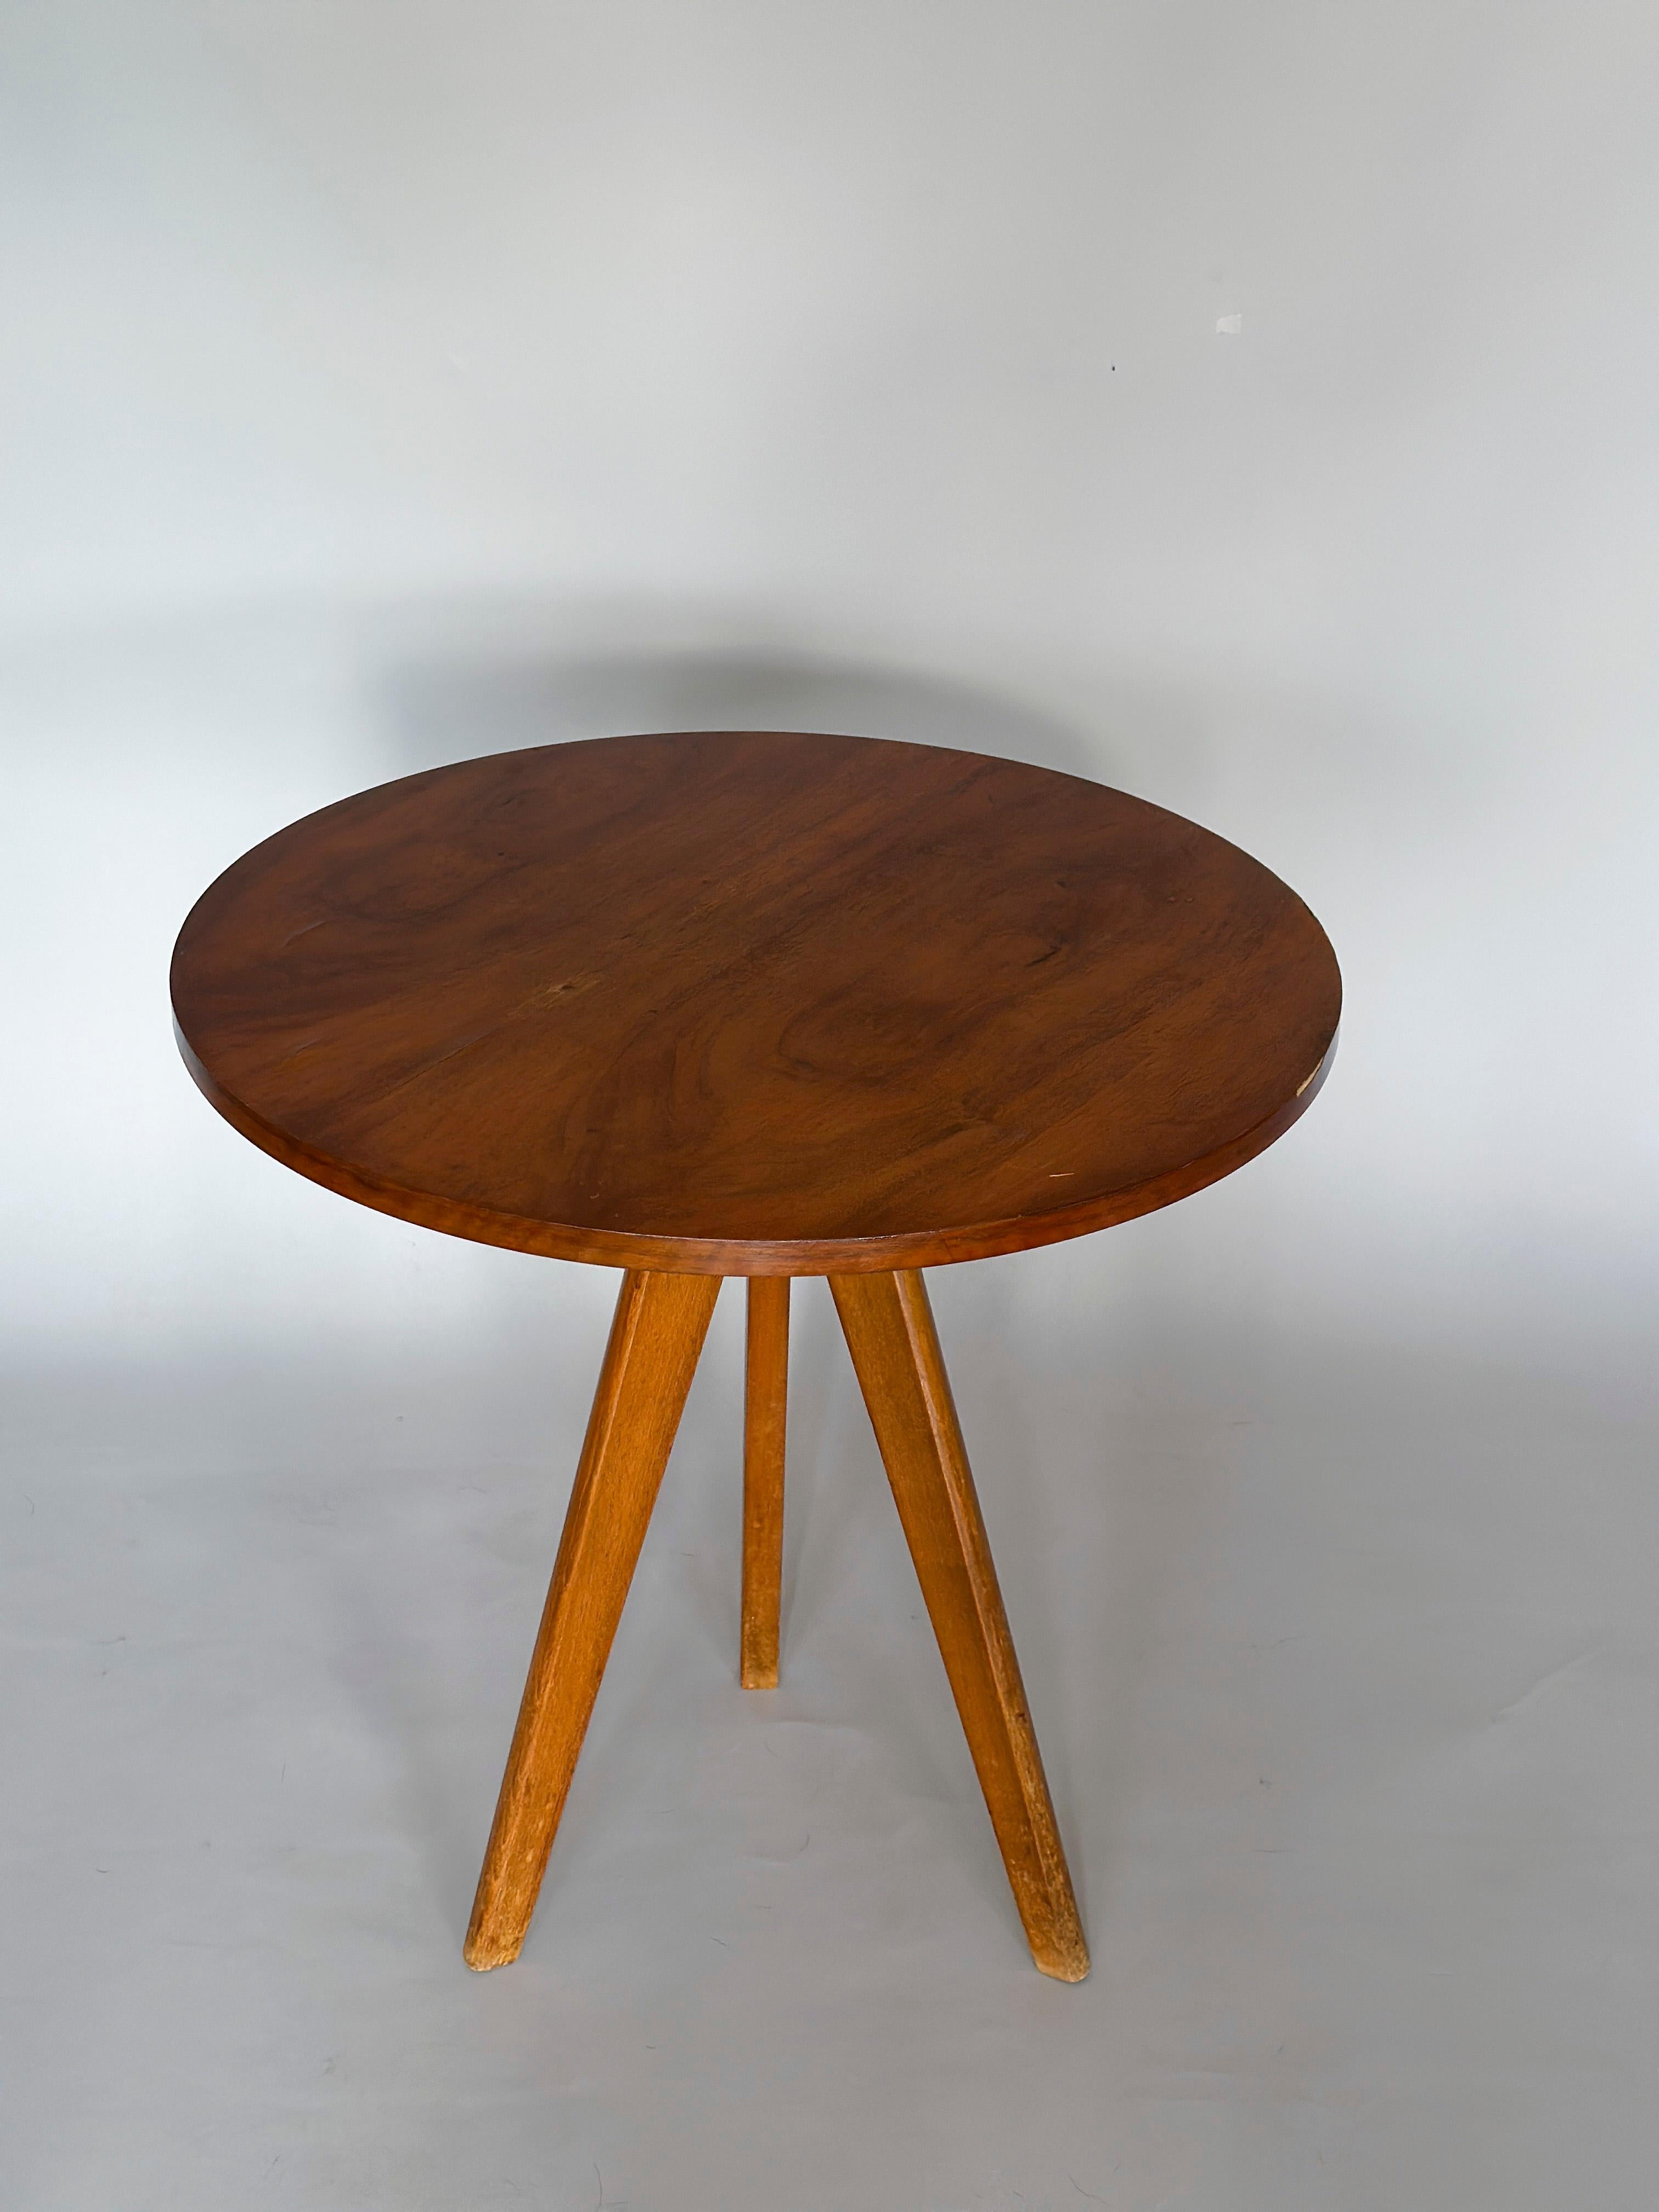 French Mid-Century Modern Coffee Table by Jean Prouve